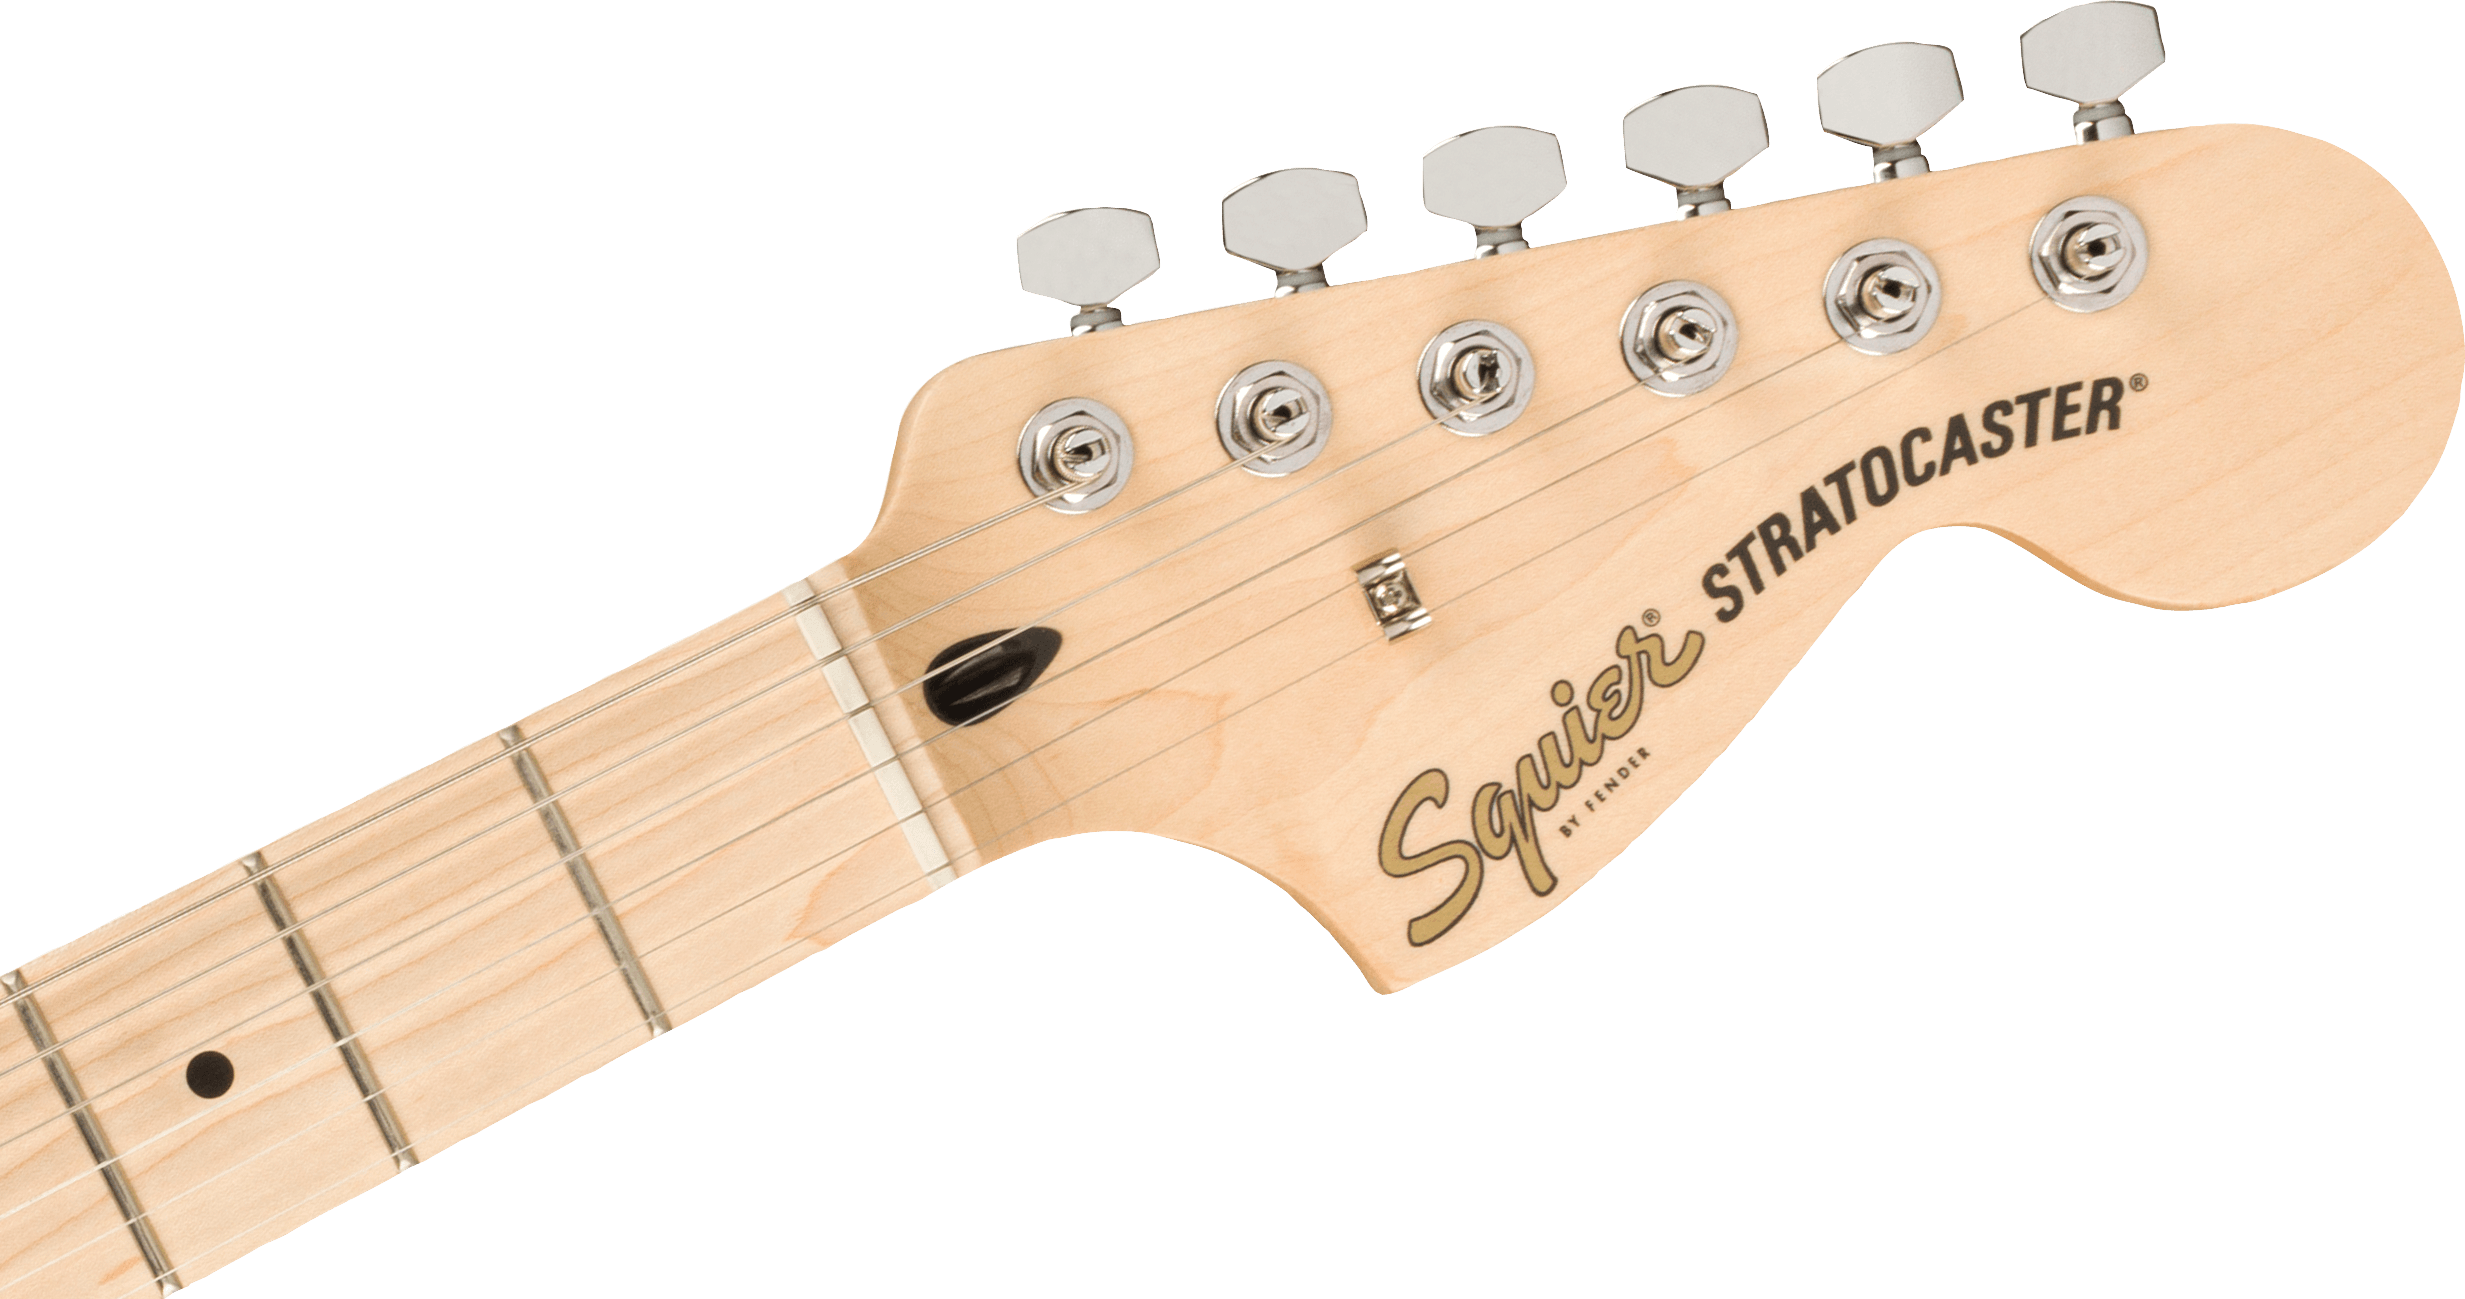 Affinity Series Stratocaster HSS Pack MN LPB